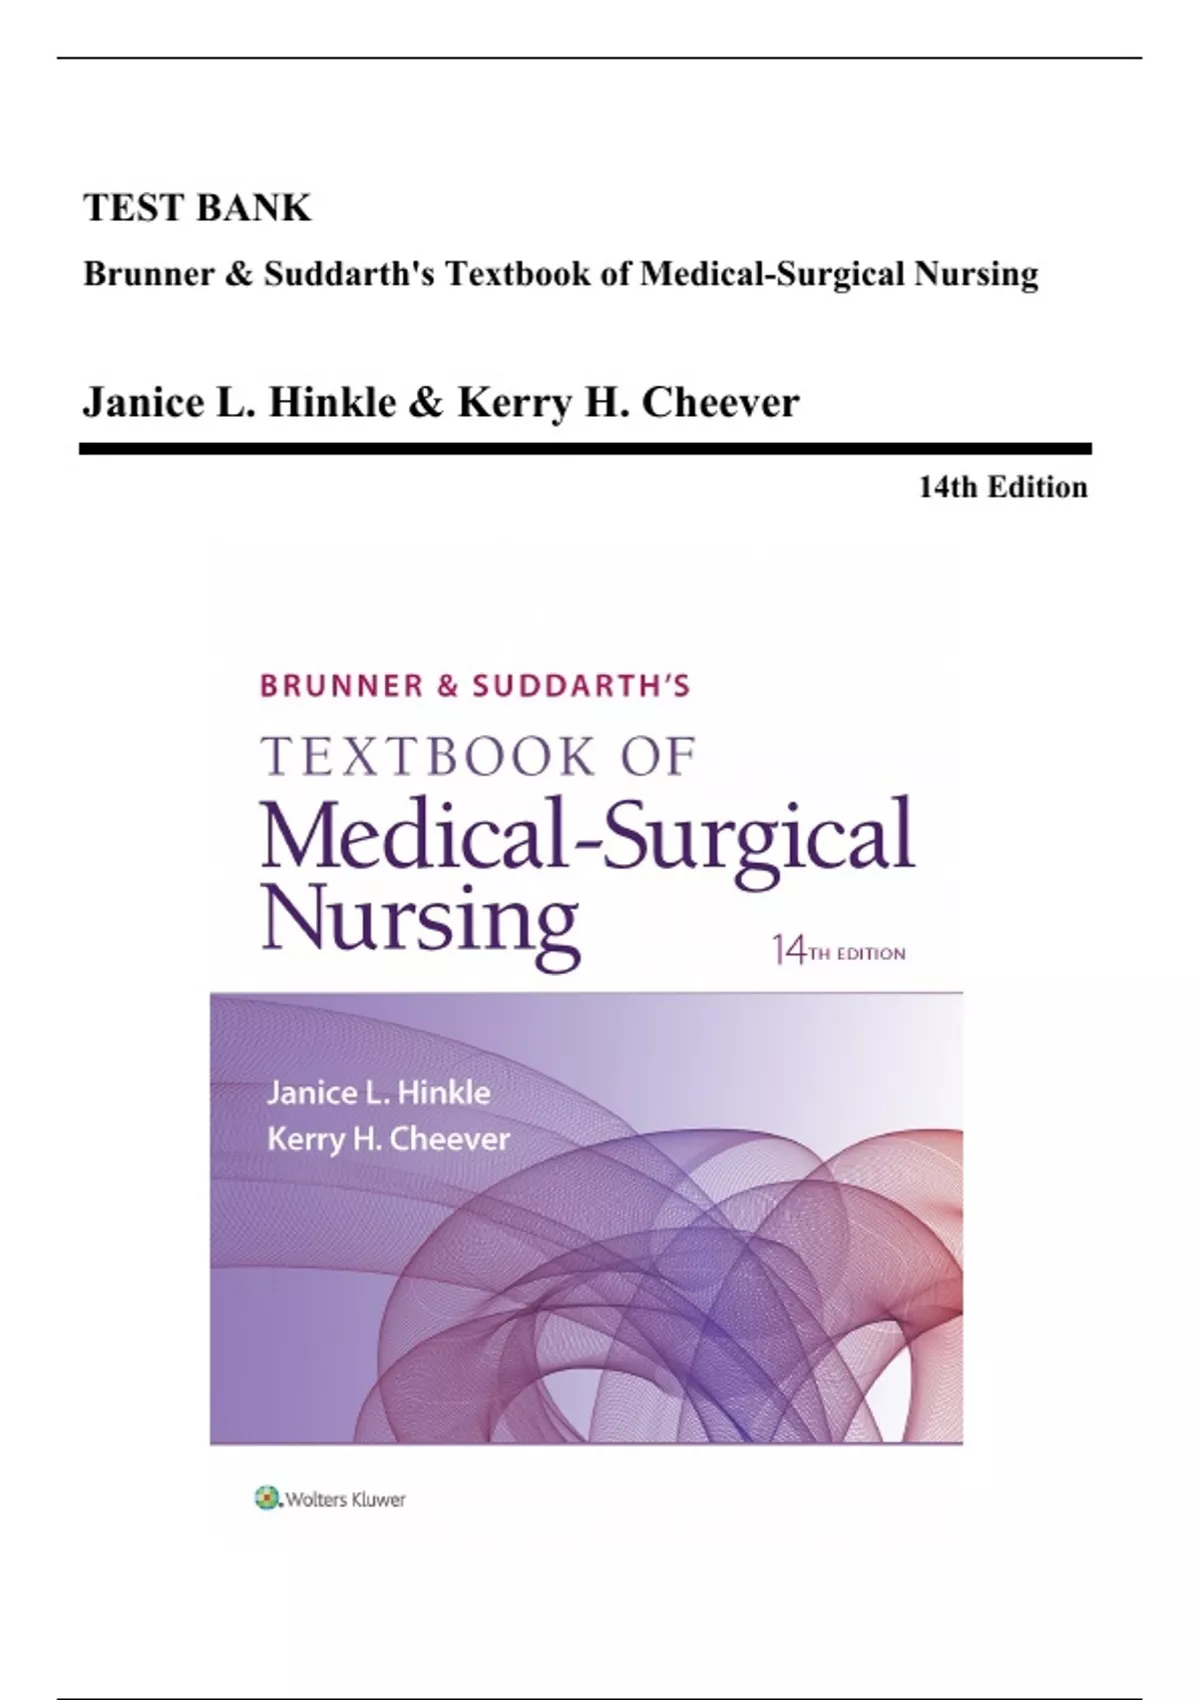 Test Bank For Brunner And Suddarths Textbook Of Medical Surgical Nursing 14th Edition By Janice 2661